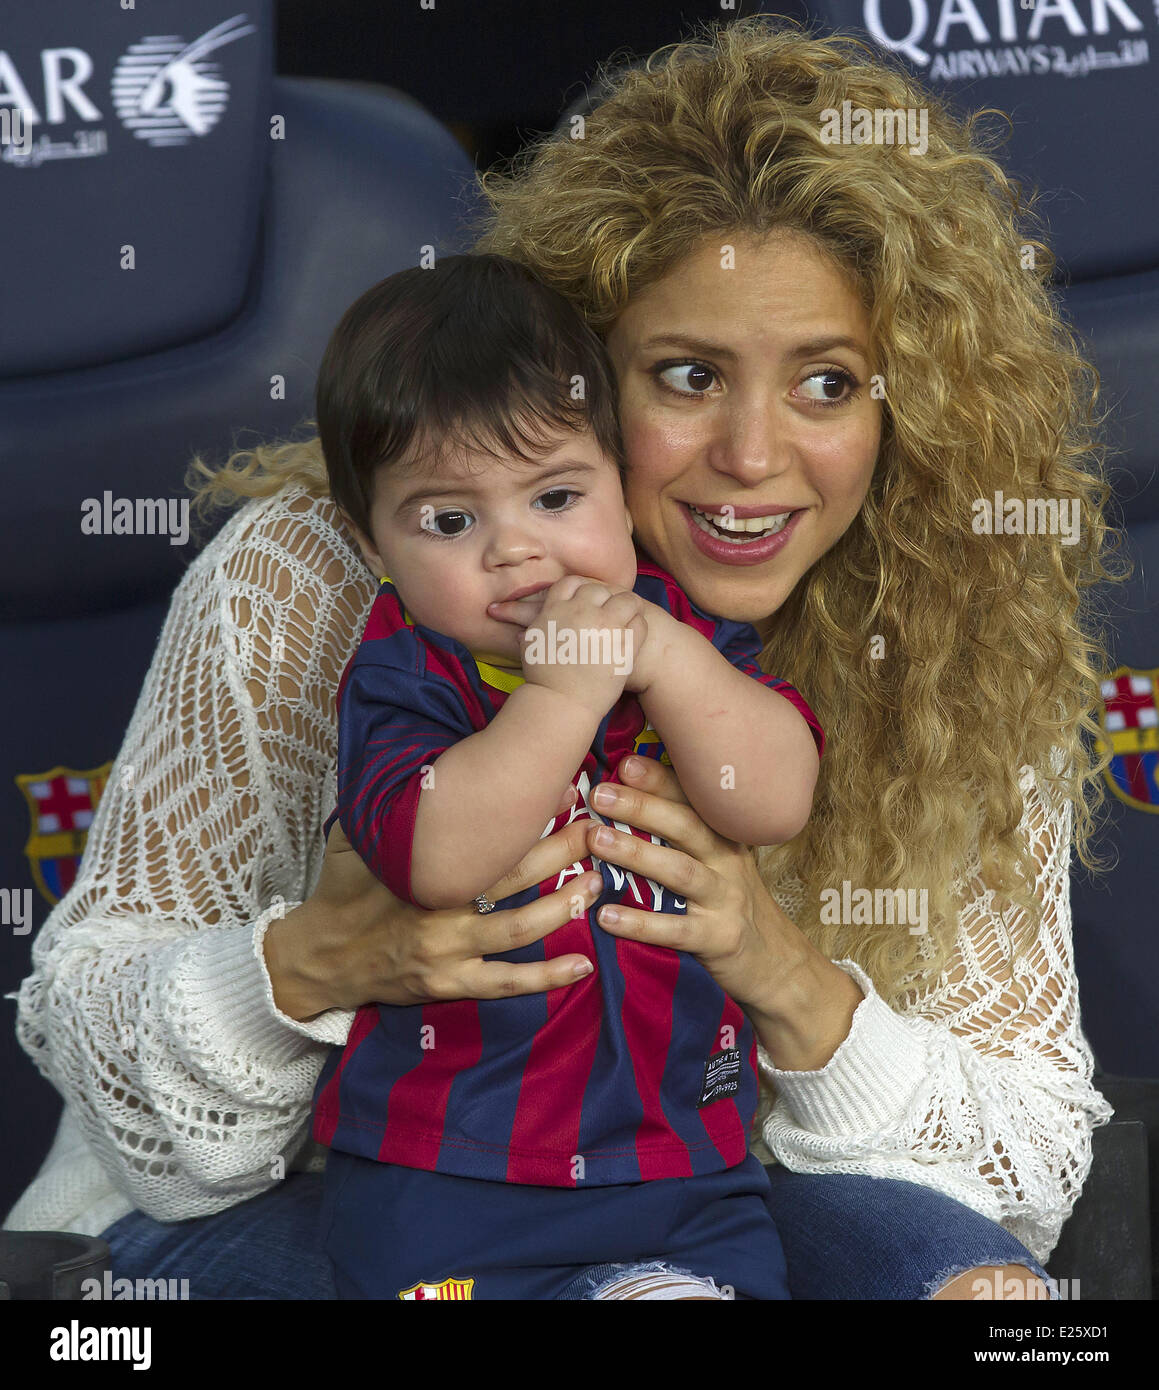 Shakira, along with her baby son and mother-in-law, watch her partner  Gerard Pique in an FC Barcelona football match against Sevilla FC  Featuring: Shakira,Milan Pique Mebarak Where: Barcelona, Spain When: 14 Sep